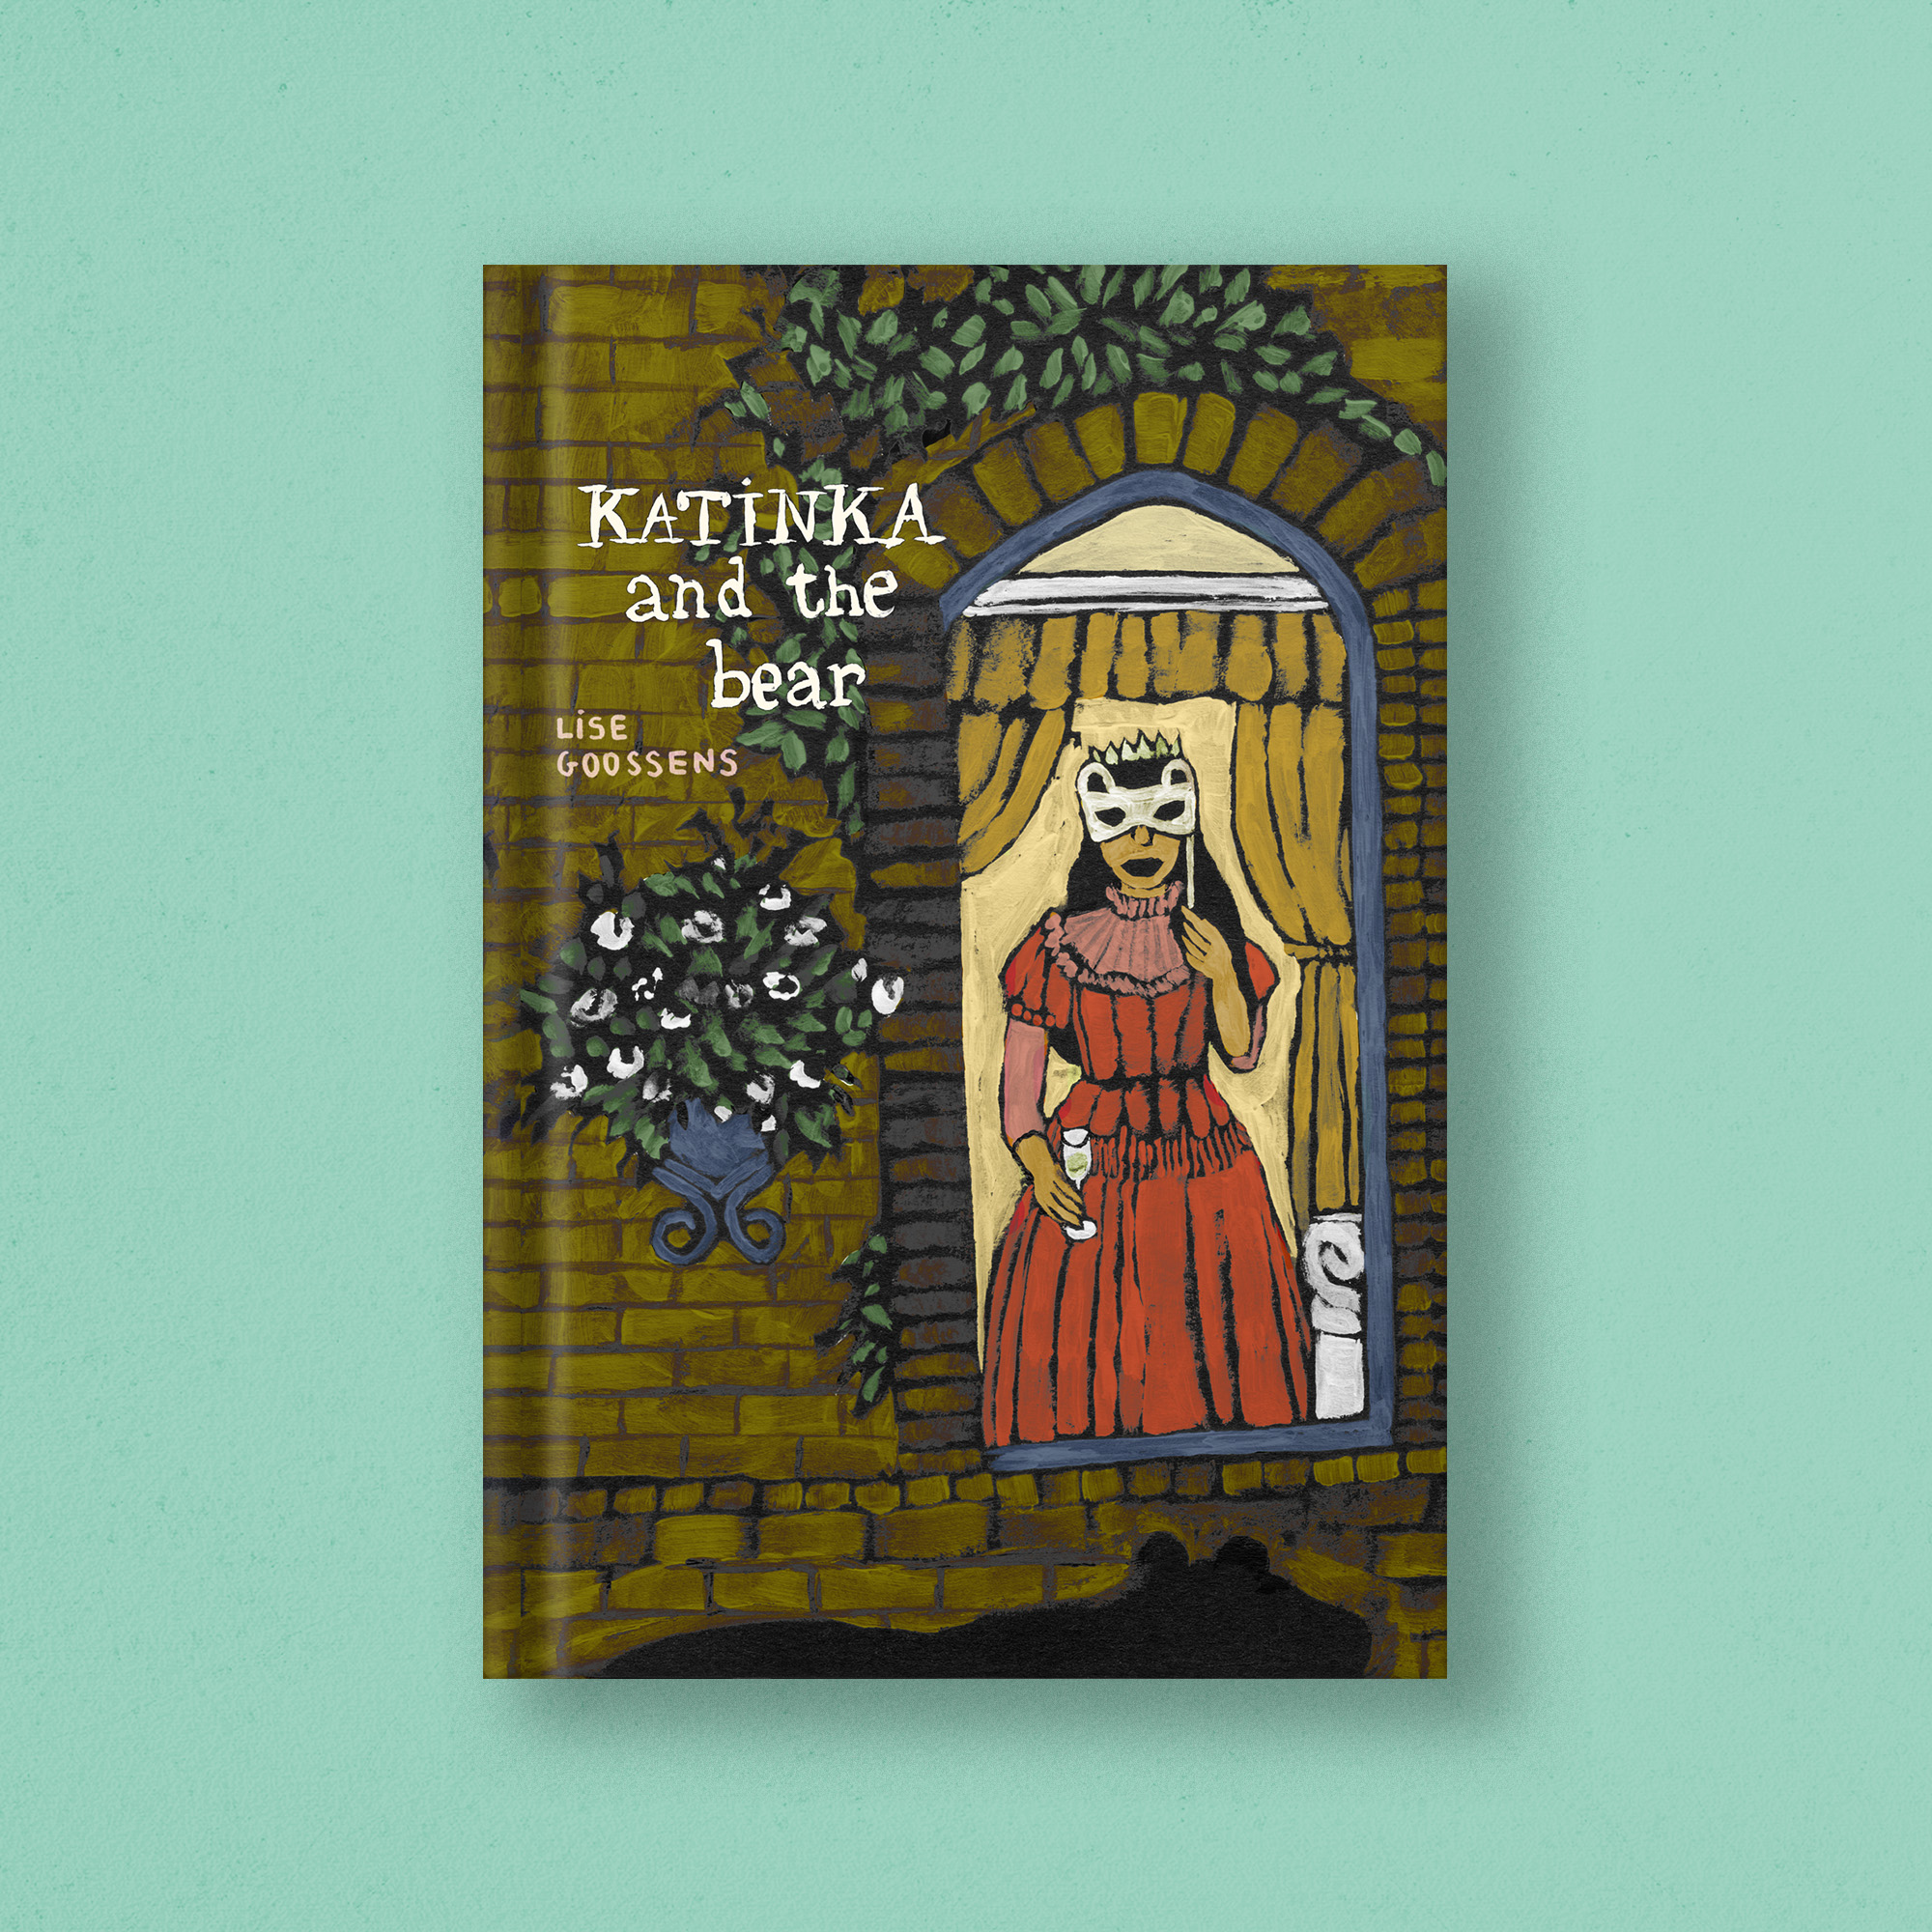 Hand drawn kidlit cover illustration showing a princess in a window